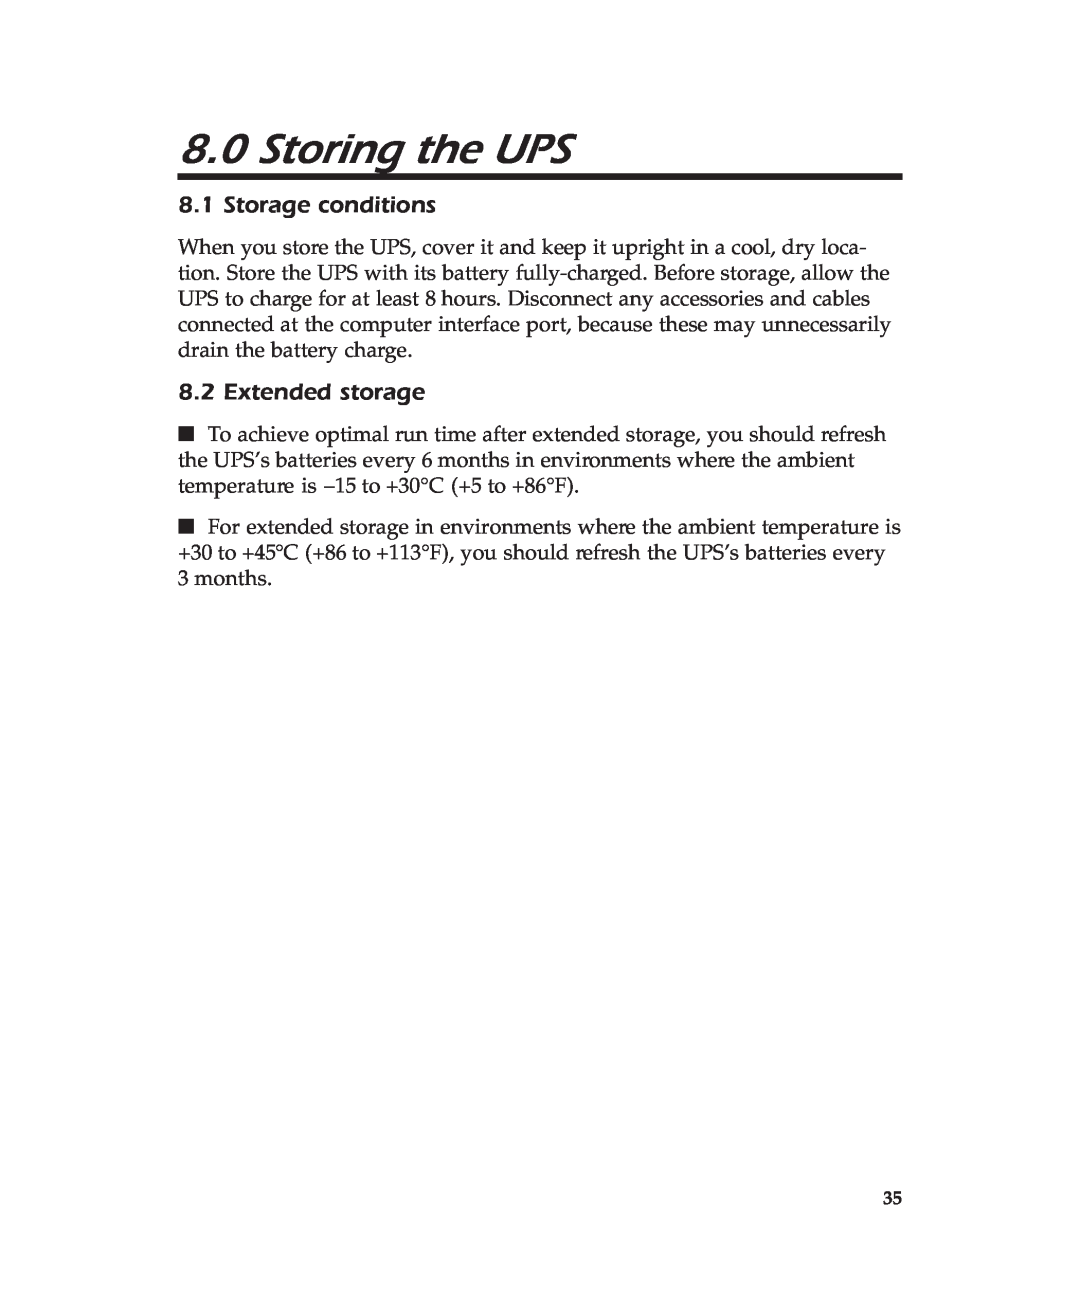 APC 600 user manual 8.0Storing the UPS, 8.1Storage conditions, Extended storage 